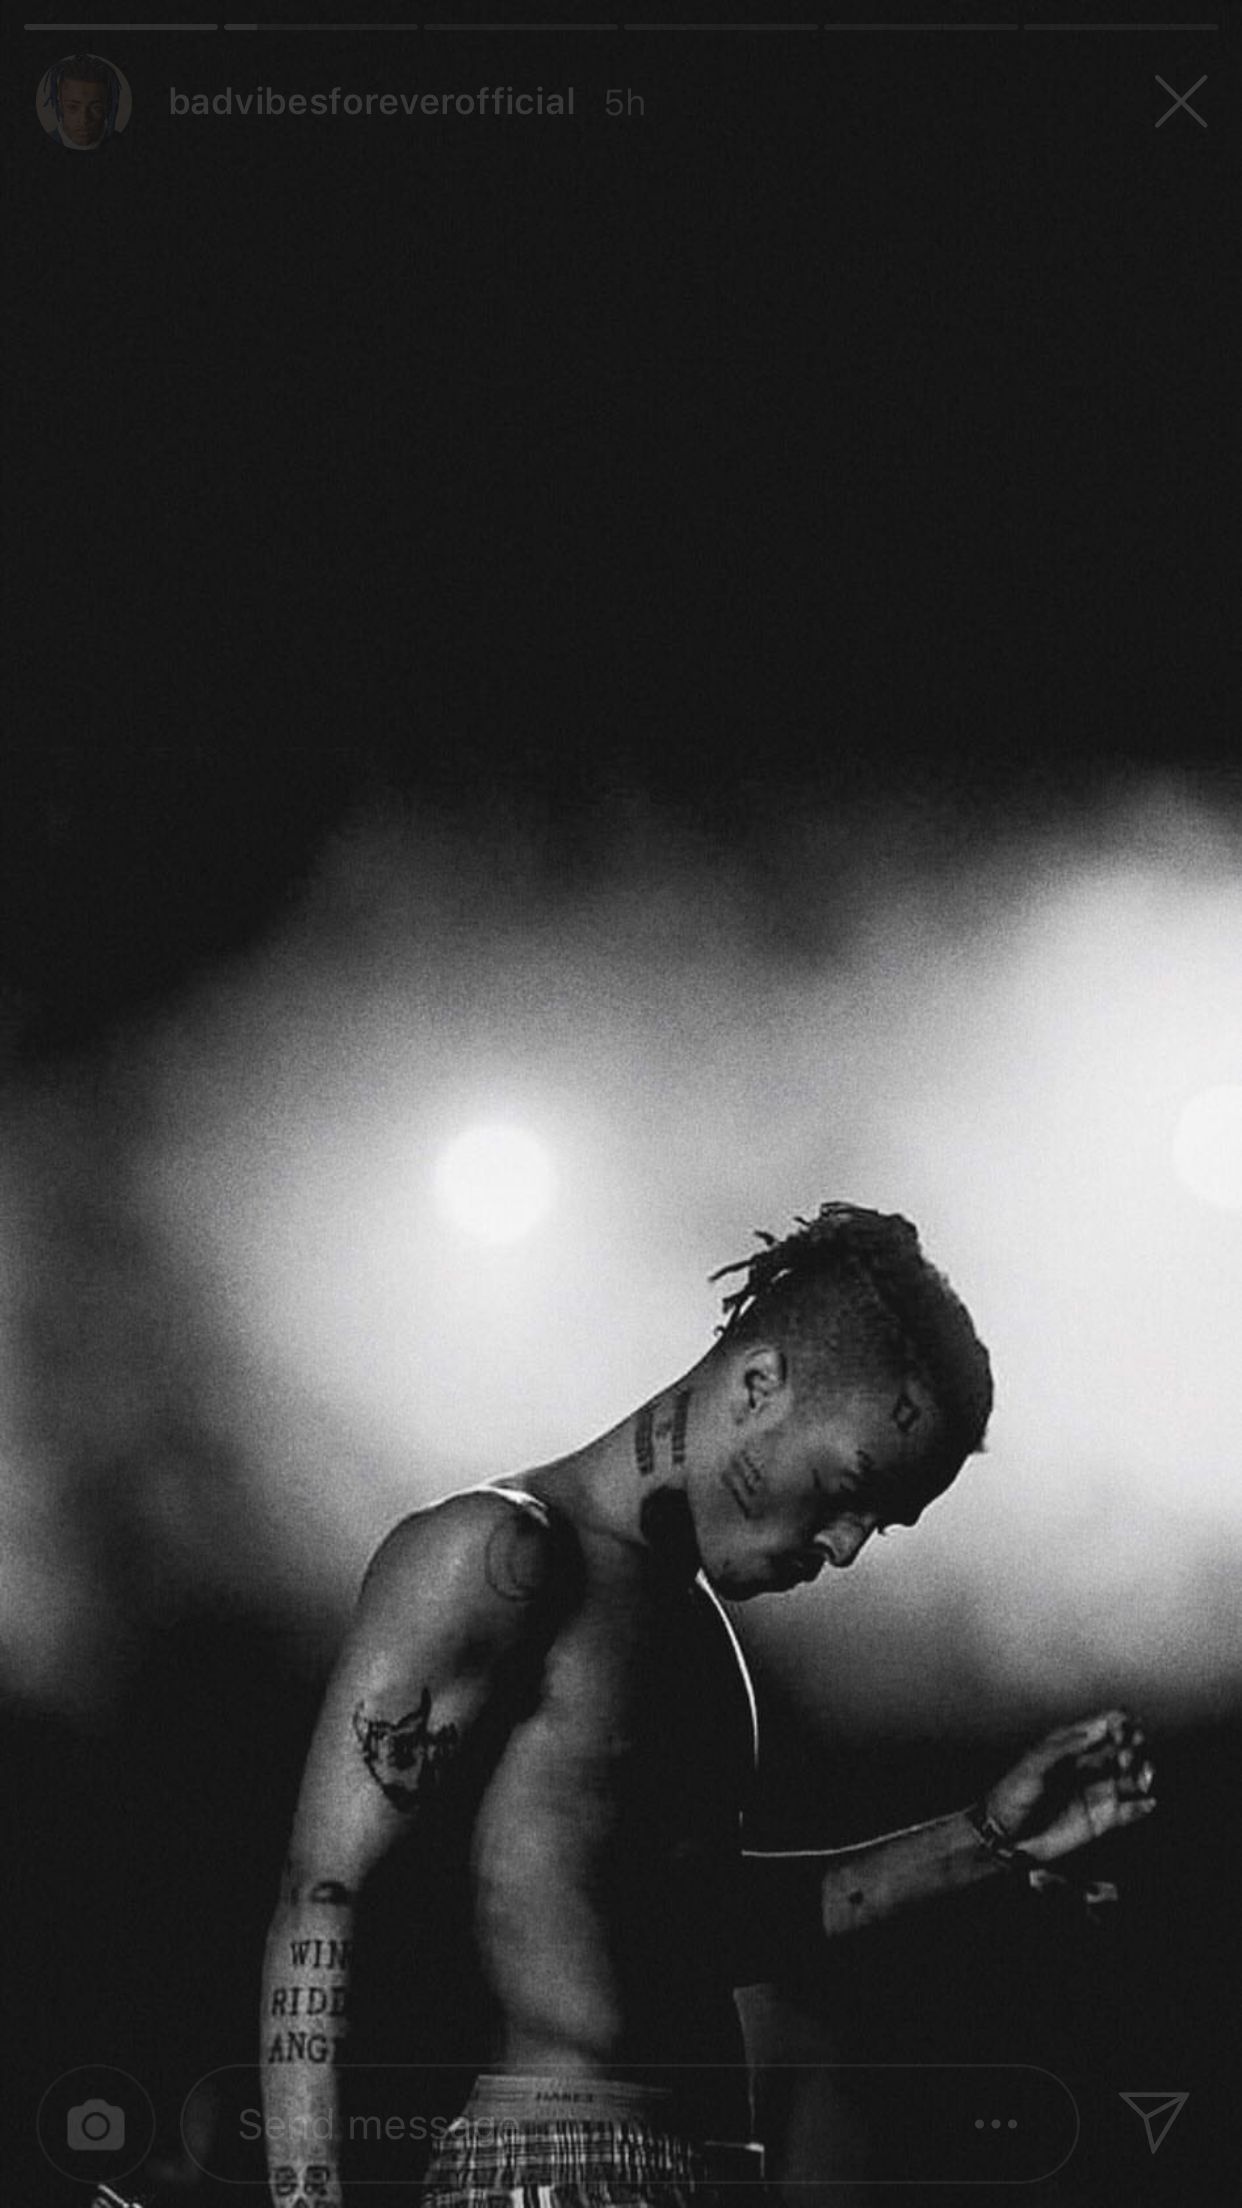 10 Top Xxxtentacion Wallpaper Aesthetic You Can Get It Without A Penny Aesthetic Arena